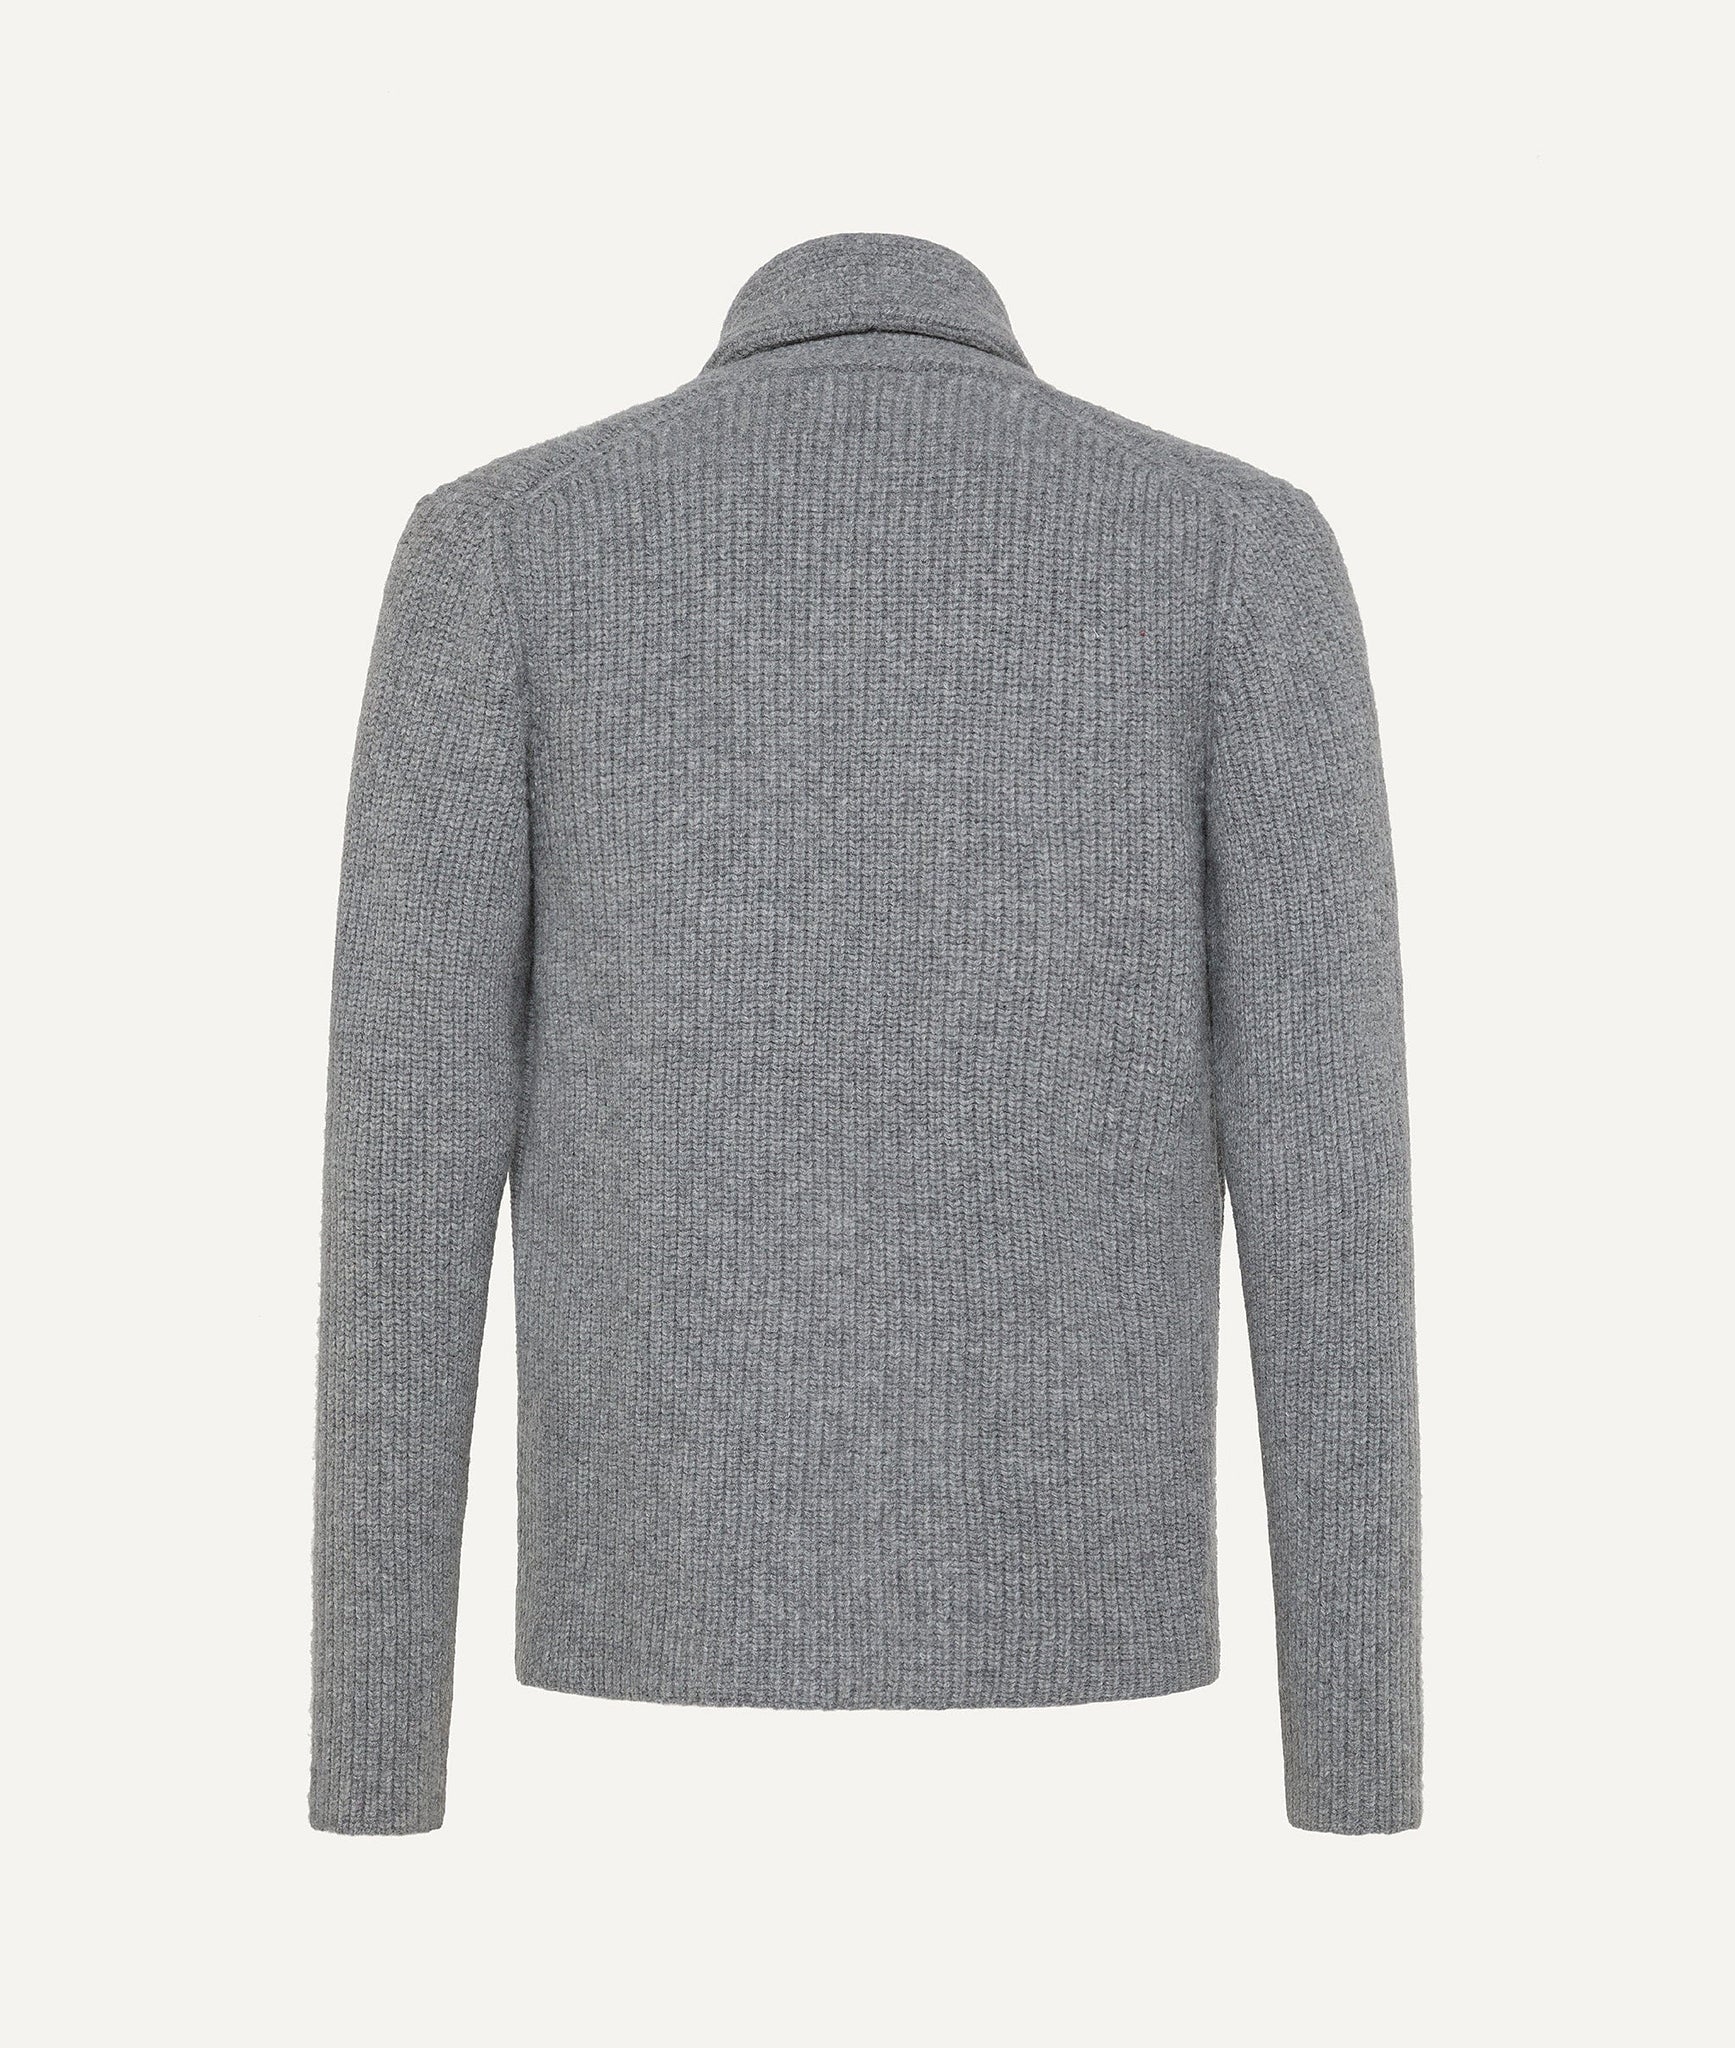 Svevo - Ribbed Double Breasted Sweater in Wool